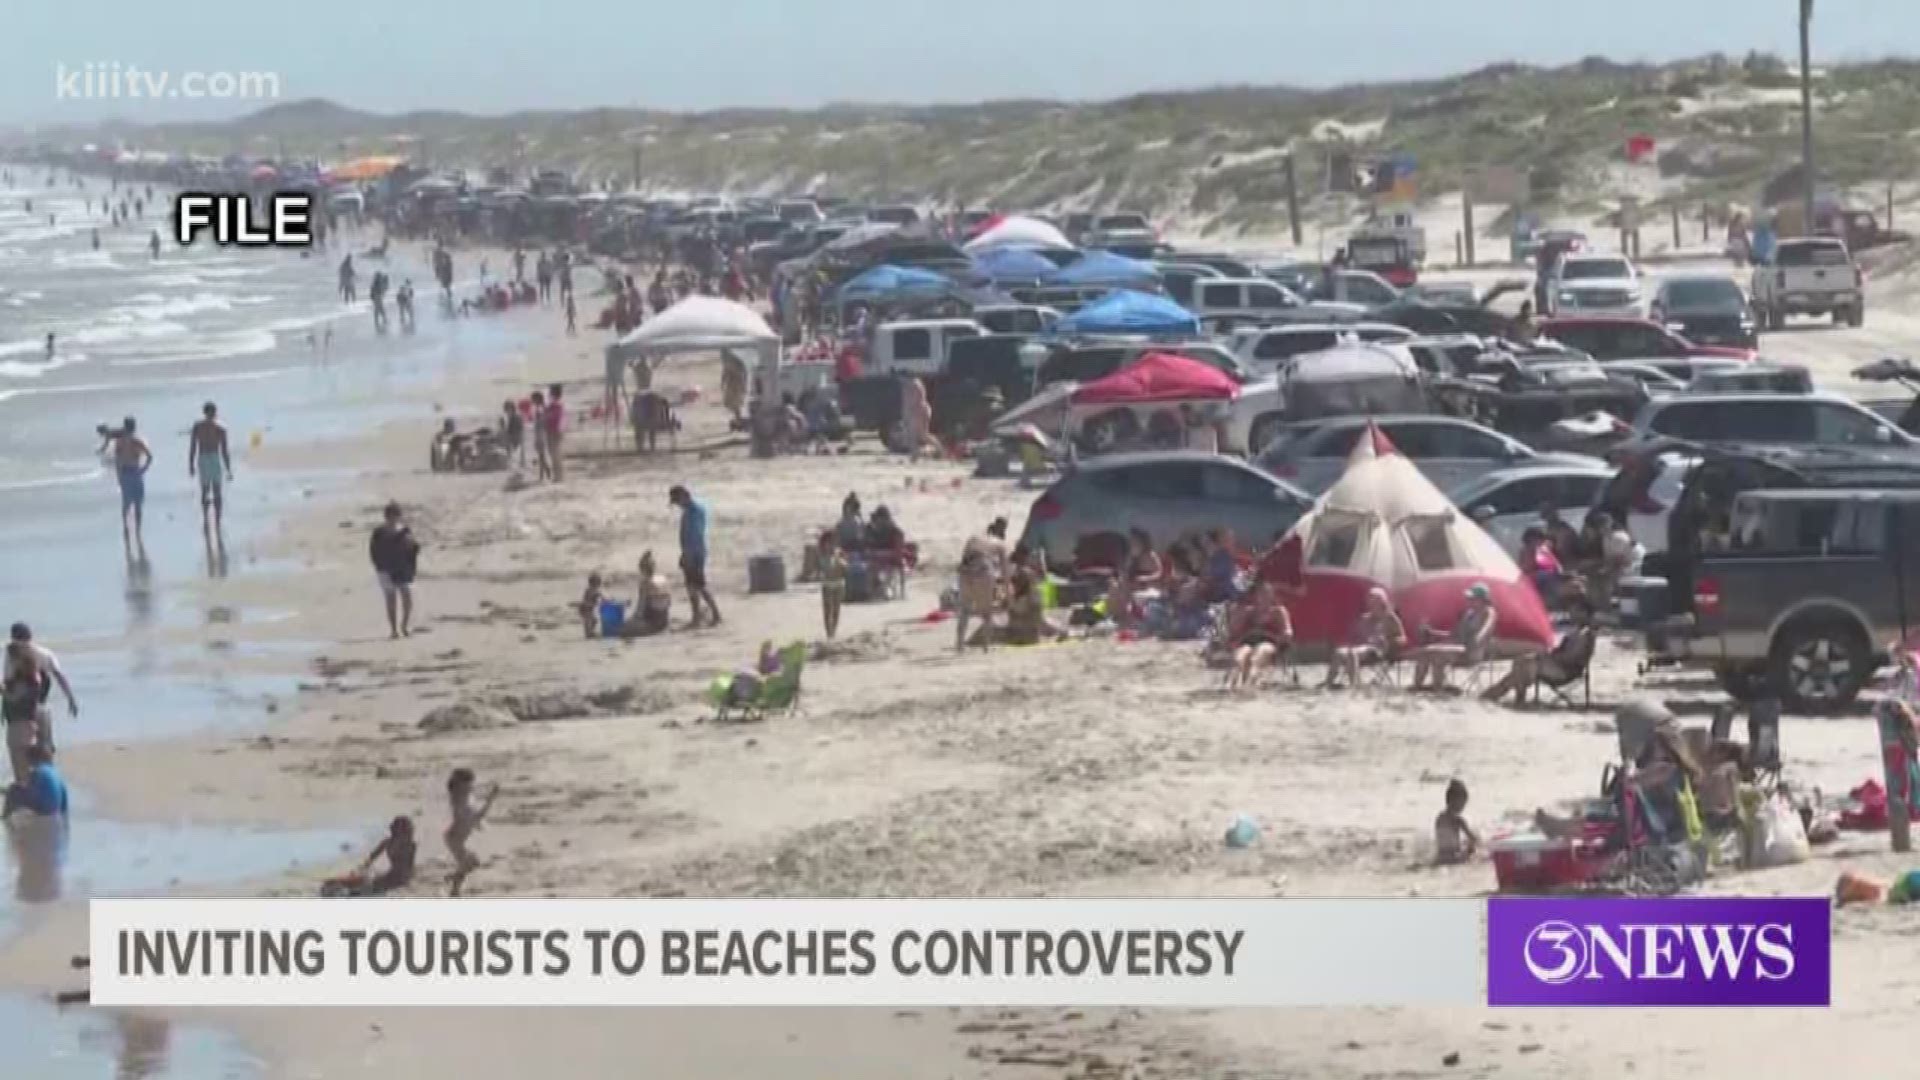 The President of Visit Corpus Christi Texas Brett Oetting, says the coastal distancing promotion is not about inviting anyone to our beaches.